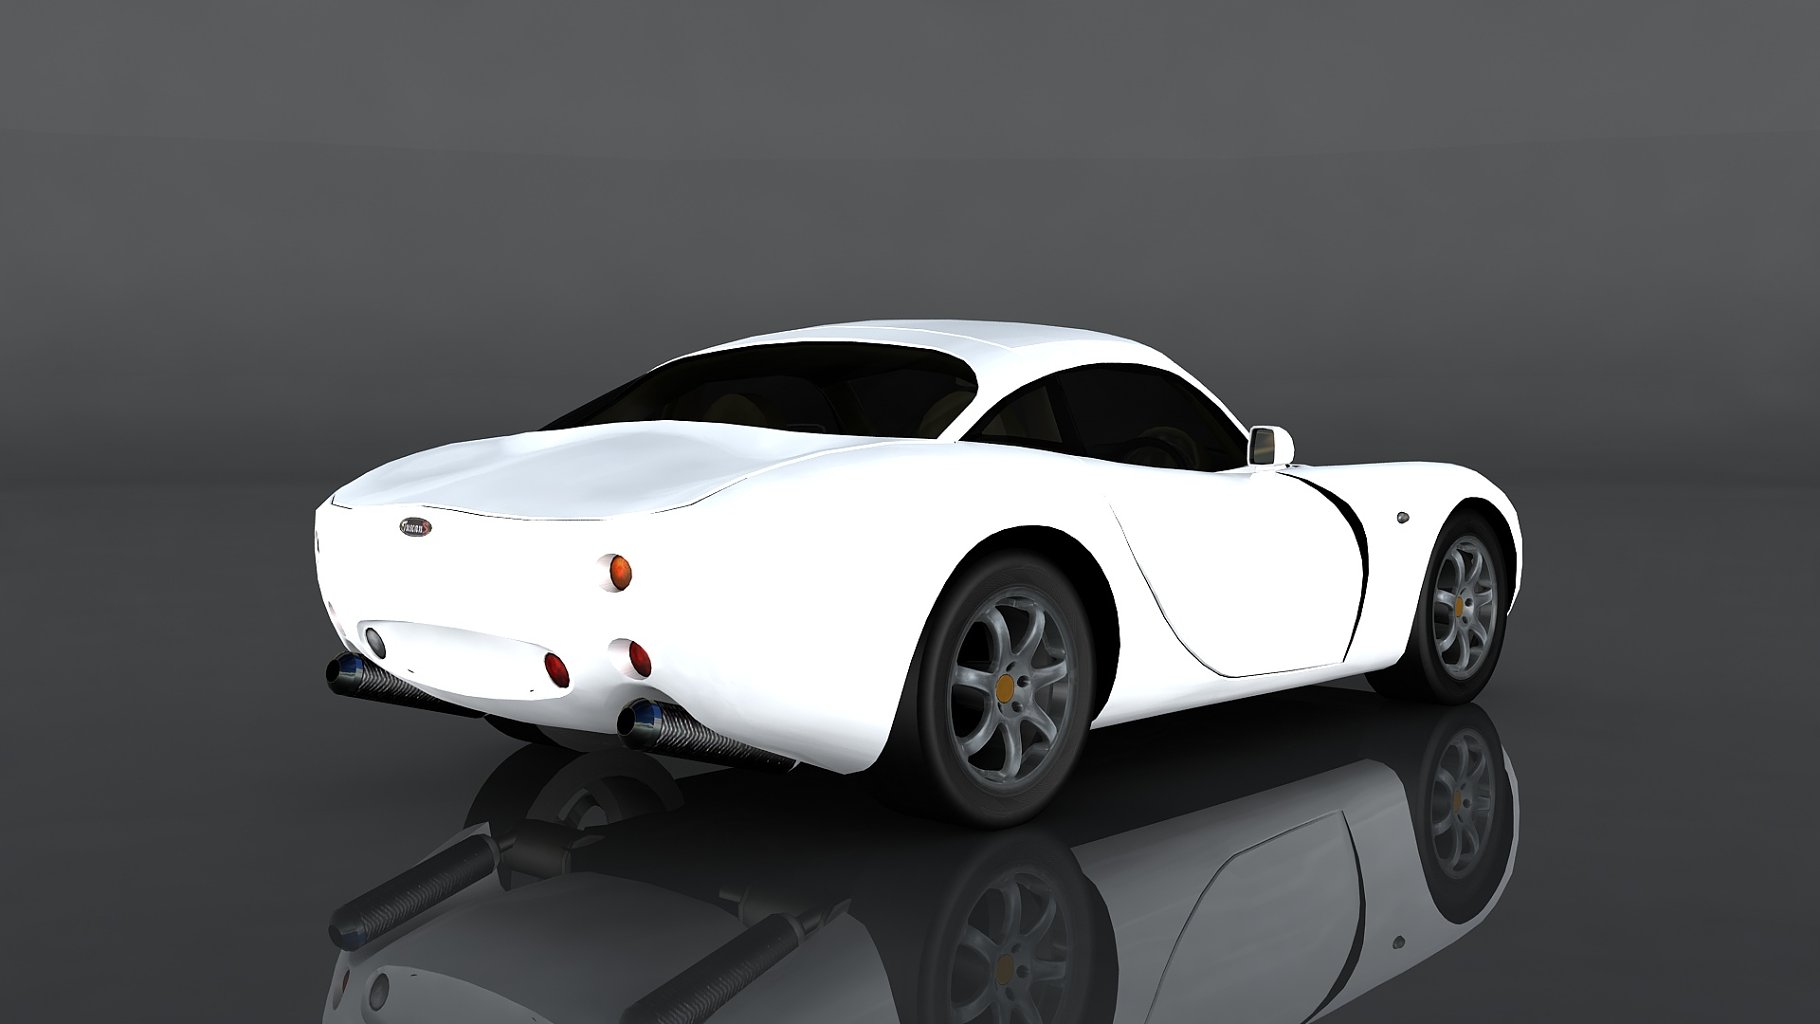 Back right mockup of 2001 tvr tuscan s on a dark gray background.